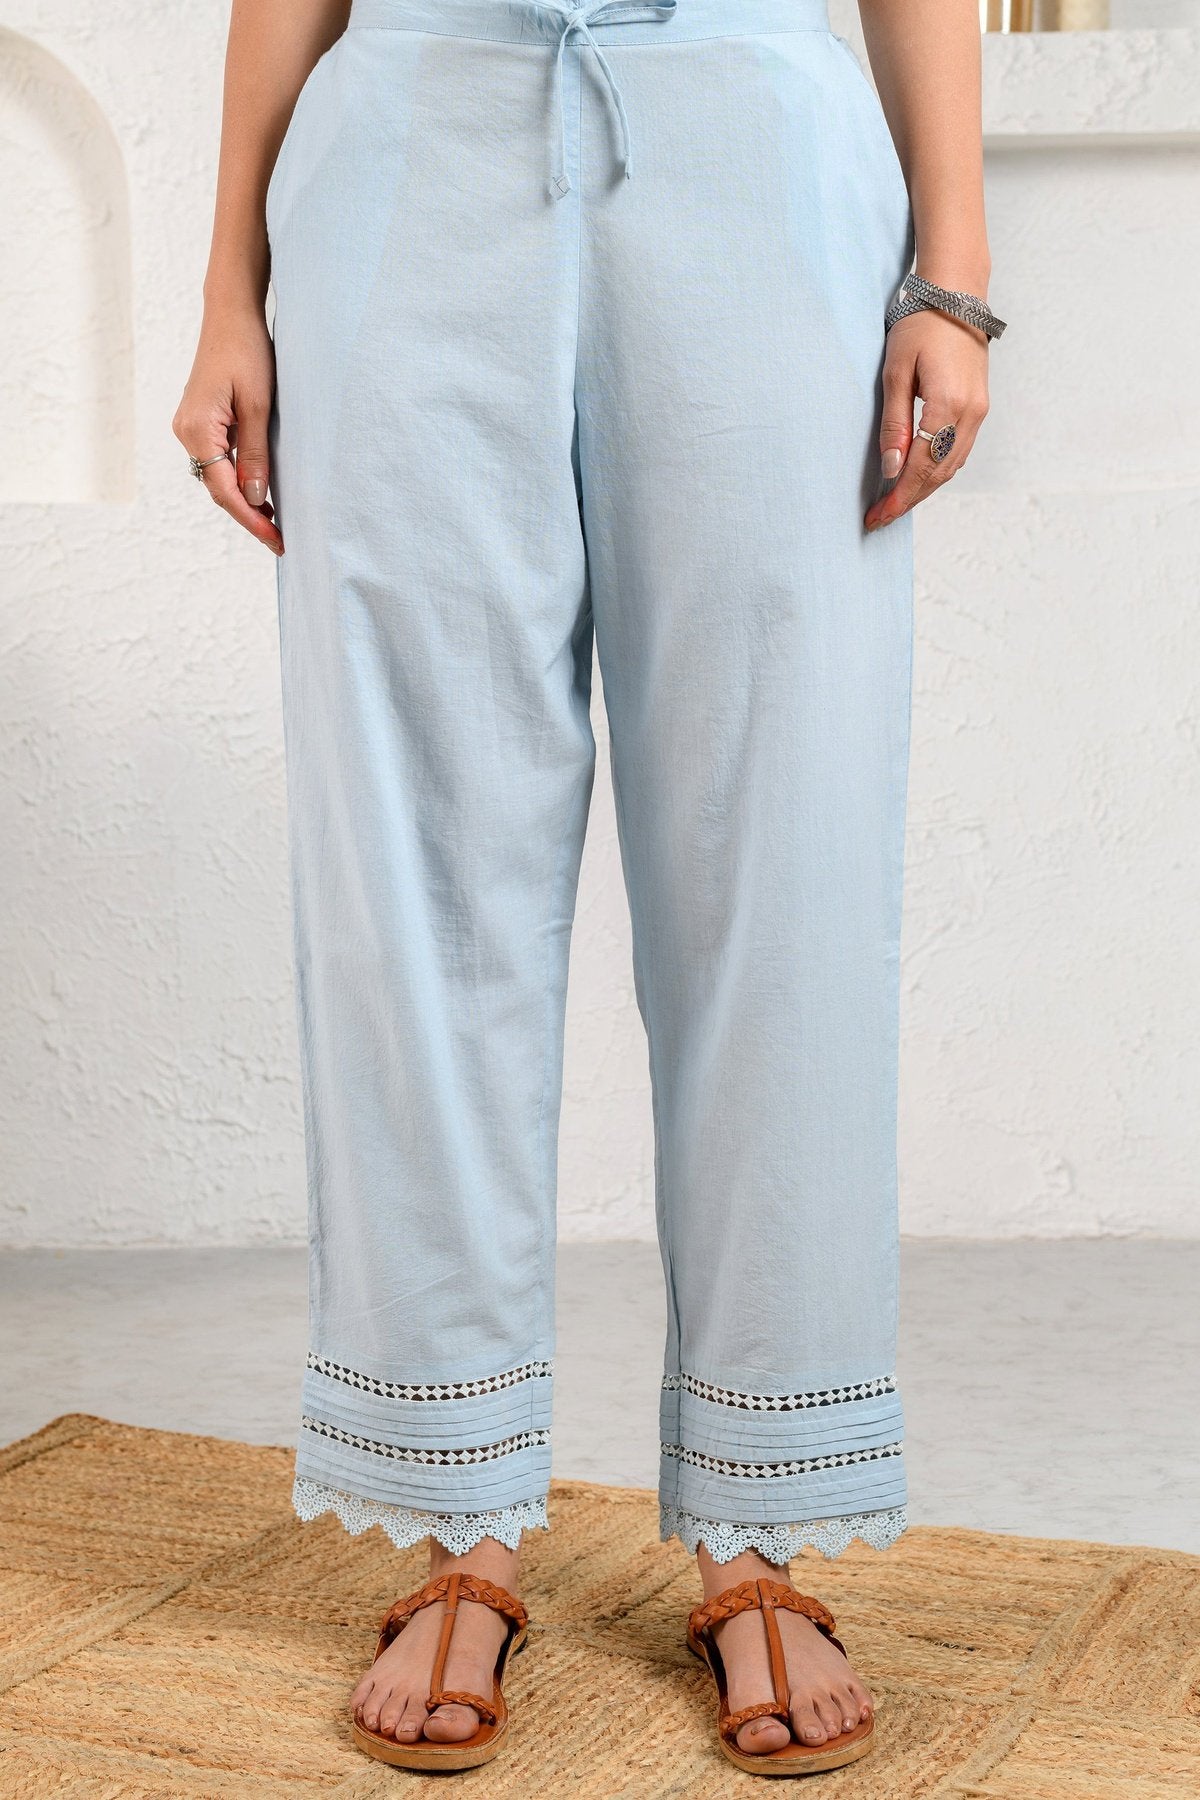 Blue Pintucked Lace Pants